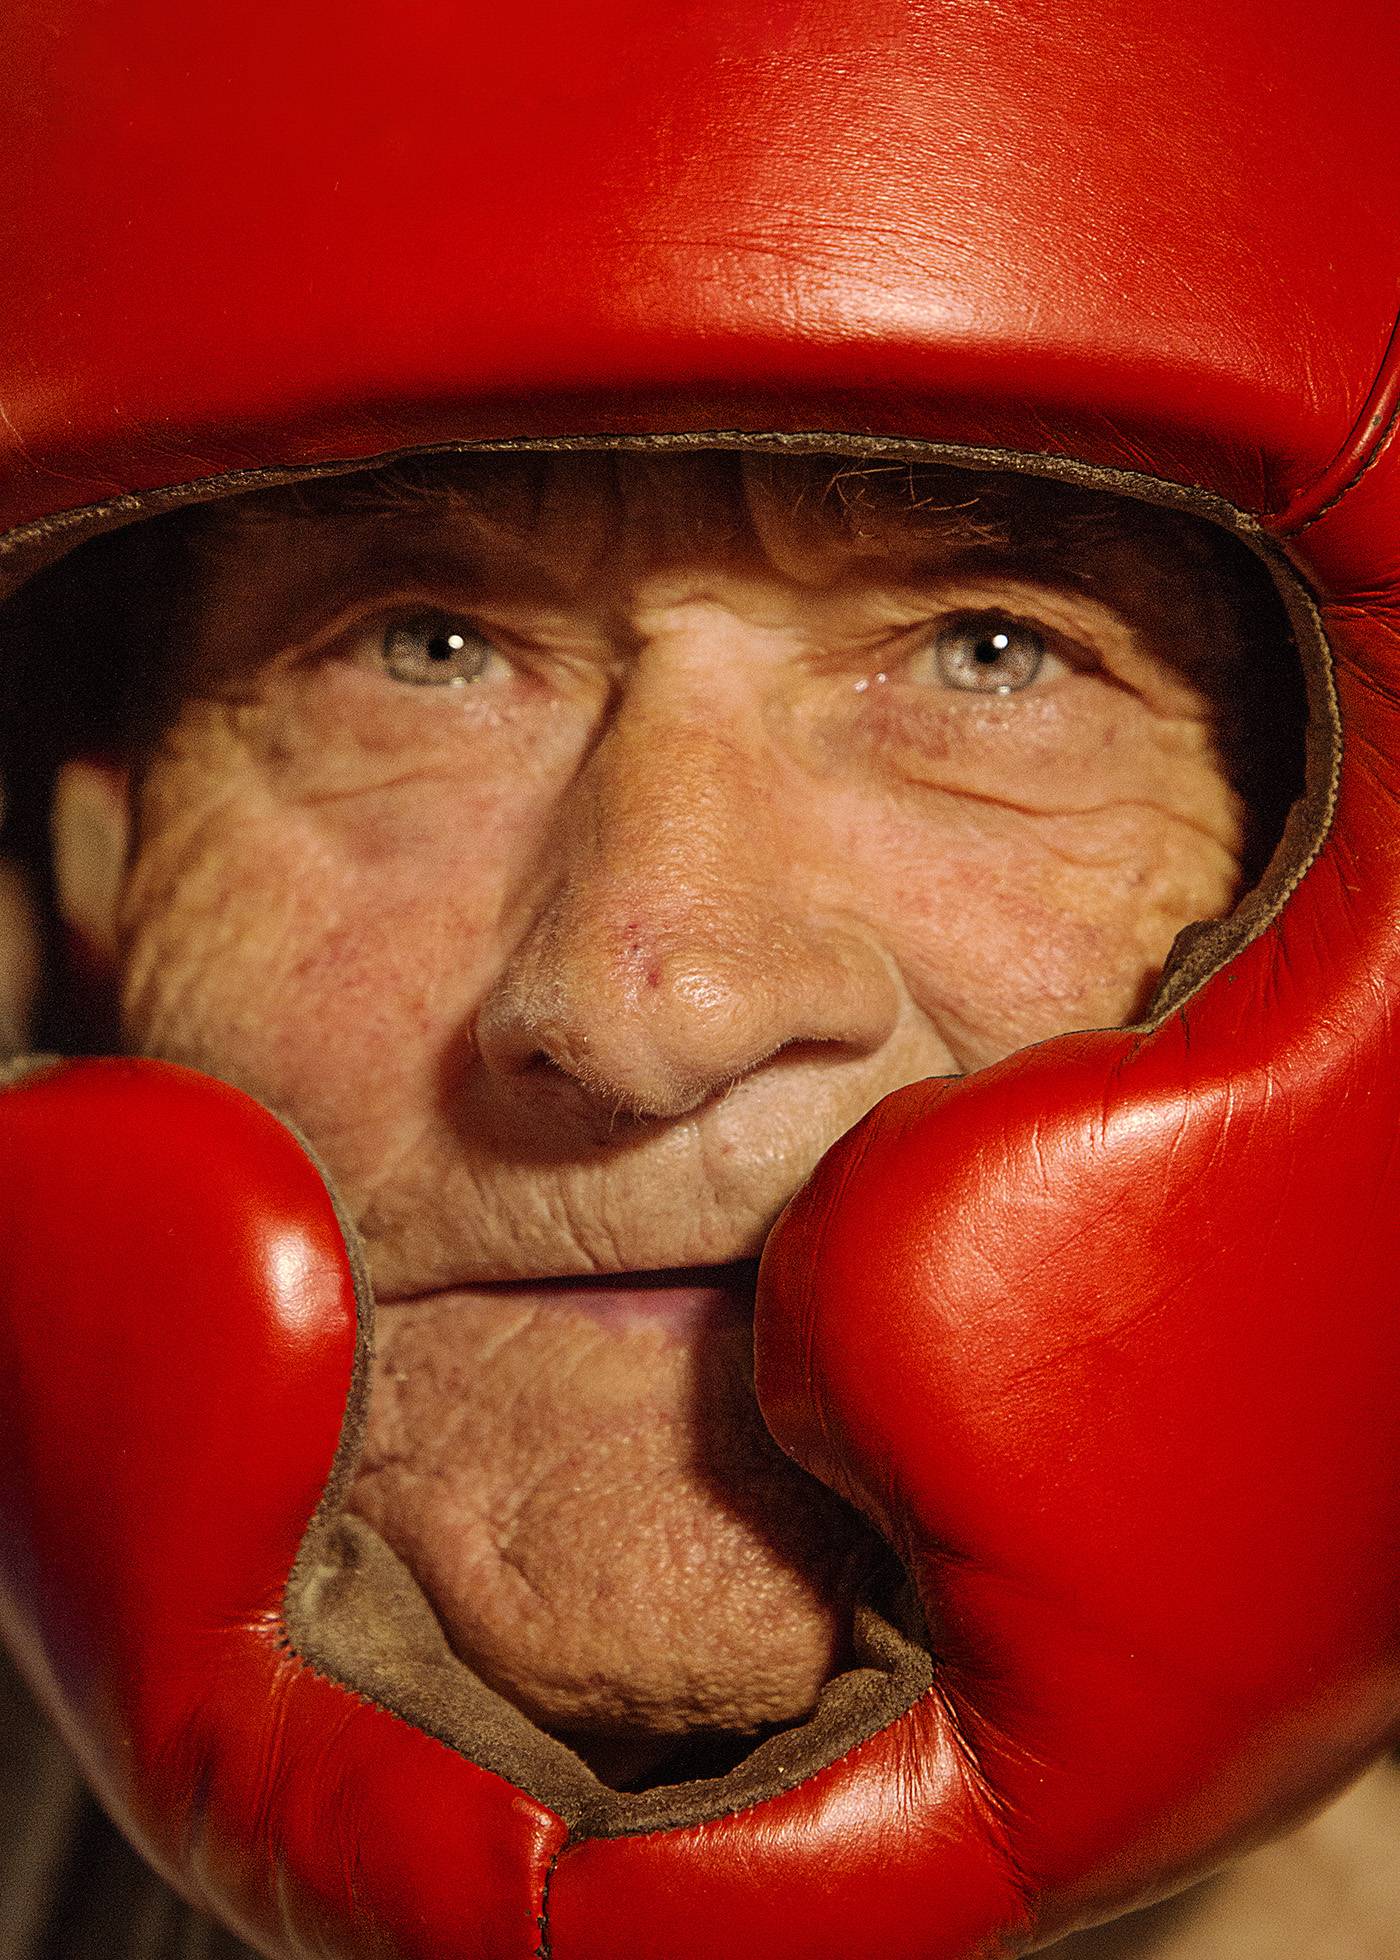 A portrait of an old man's face boxing. The man has a kind face and is looking into the camera with very fierce eyes. The old man is wearing red headgear and is ready to fight his opponent.